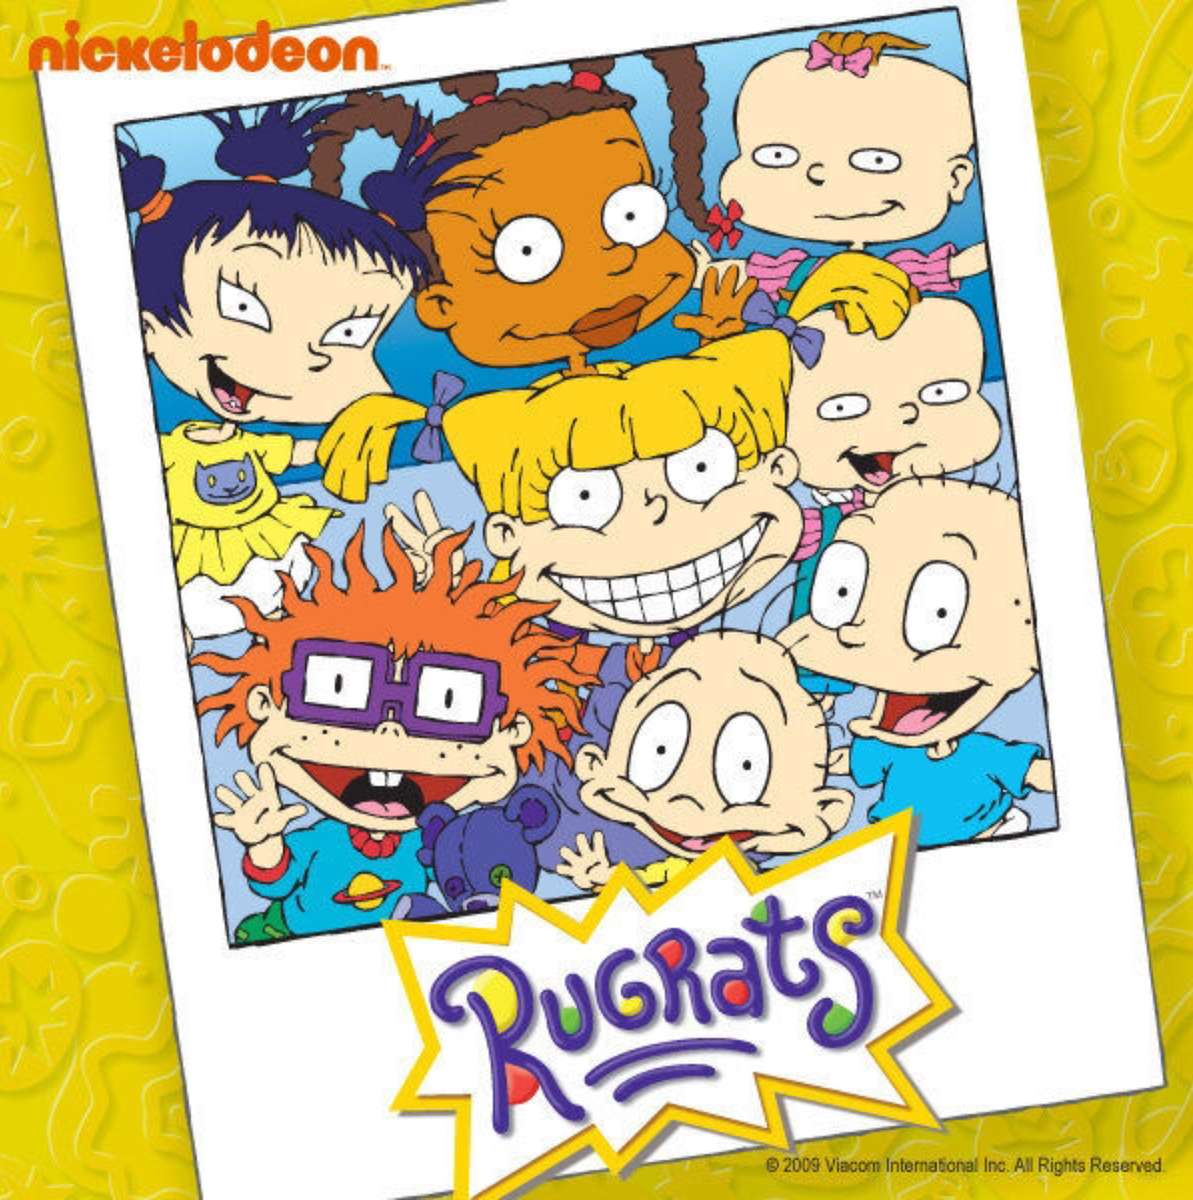 Nickelodeon Rugrats❤️❤️❤️❤️❤️❤️ puzzle online